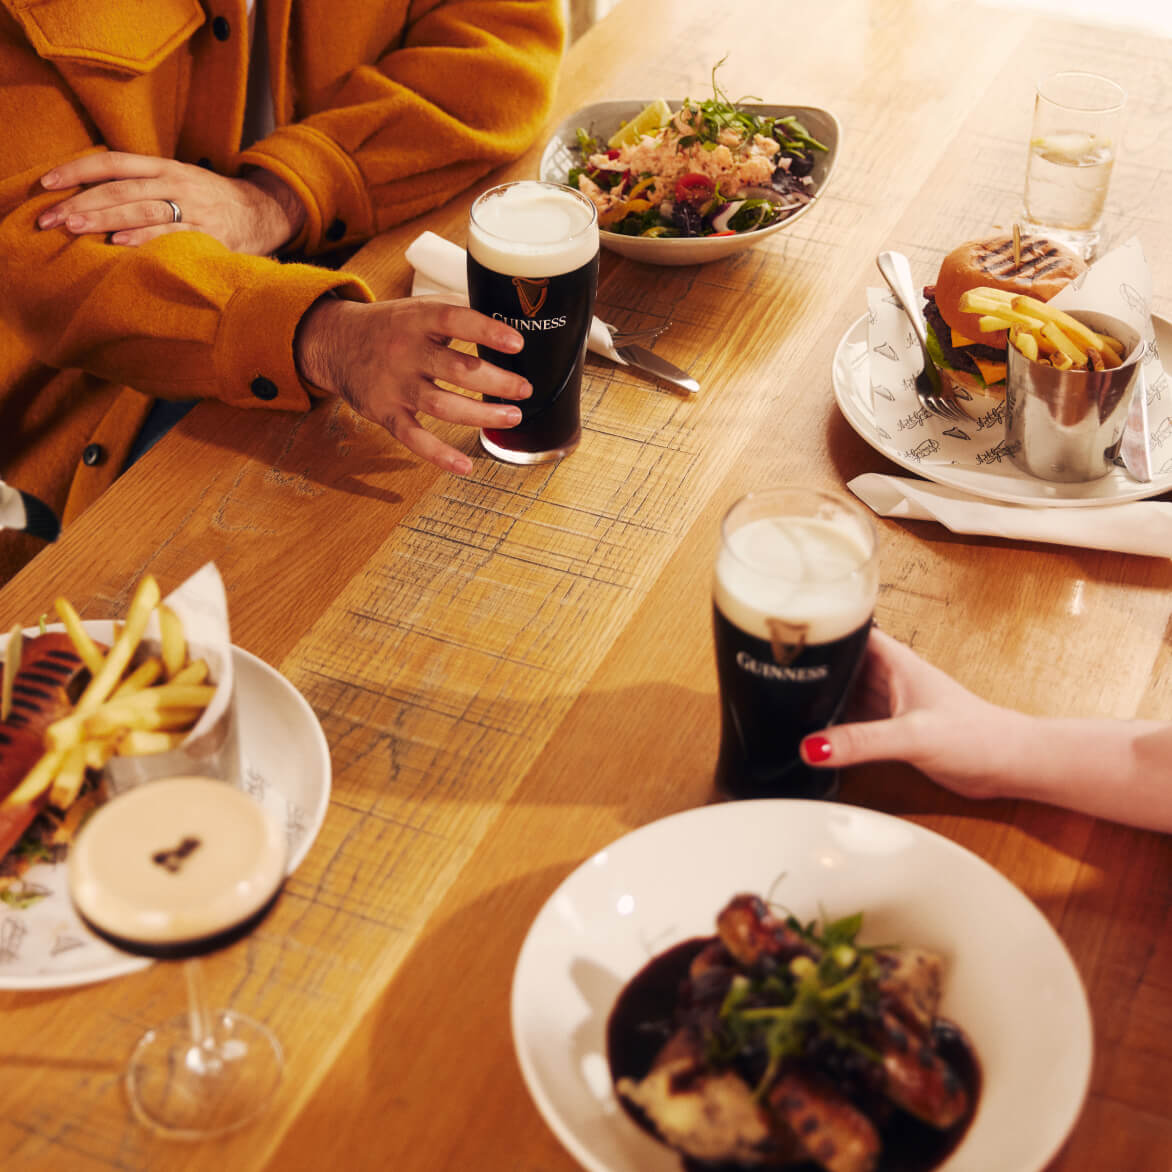 Table with 2 beautiful pints of smooth Guinness, a glass of chilled tap water, and a foamy espresso martini along with a succulent burger and chips, bangers and mash covered in a delicious homemade gravy, a fresh salad, and a tasty steak sandwich and chips. 